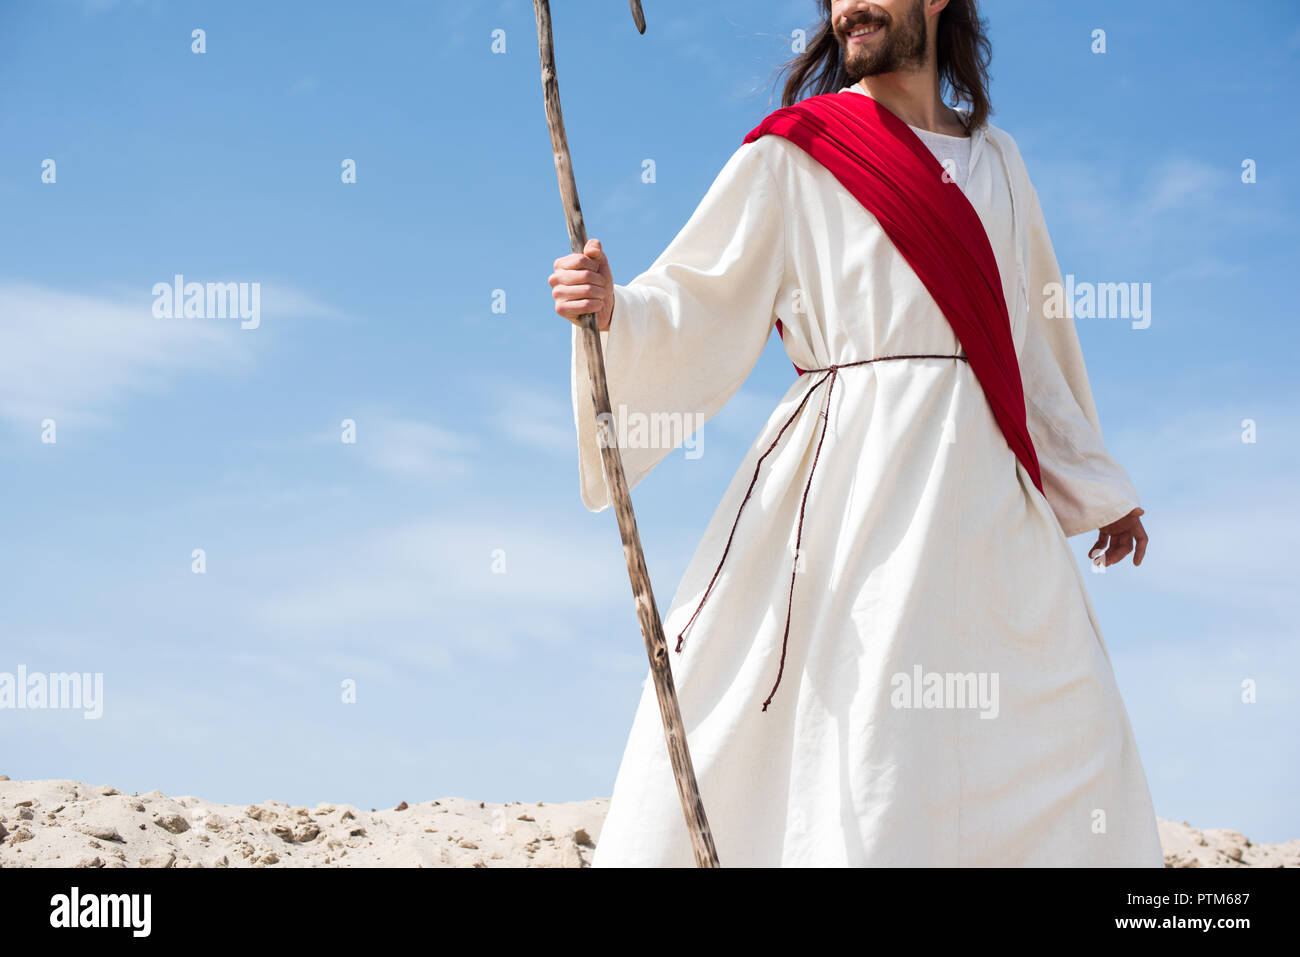 cropped image of smiling Jesus in robe and red sash standing with ...